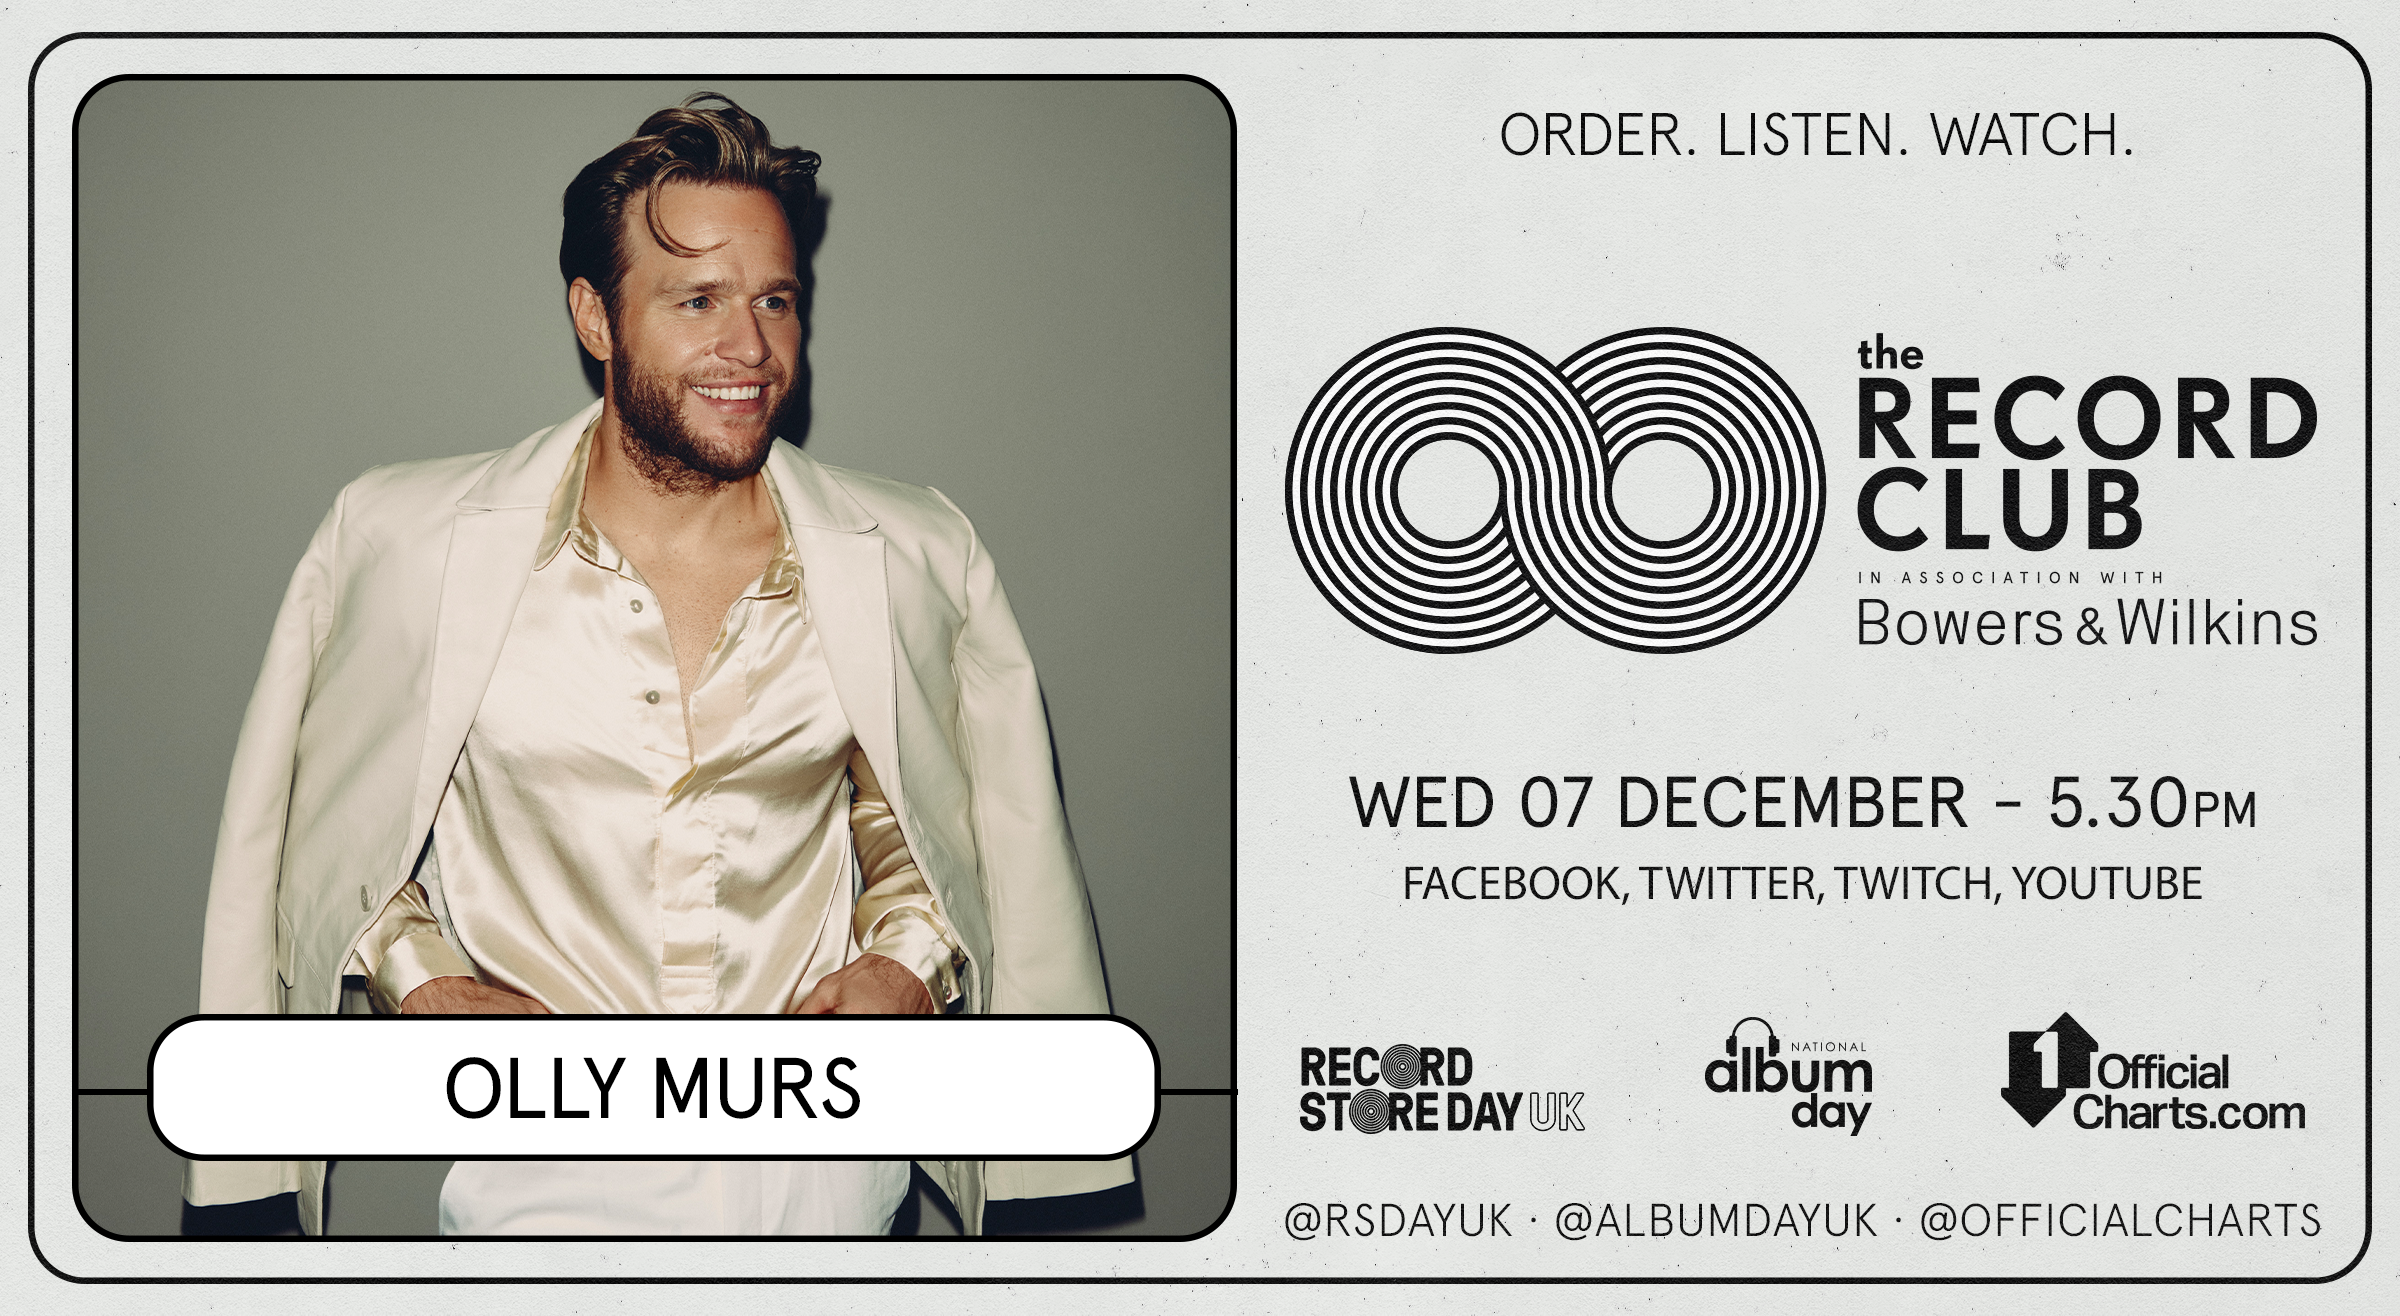 Olly Murs announced as The Record Club's guest this week with new album Marry Me